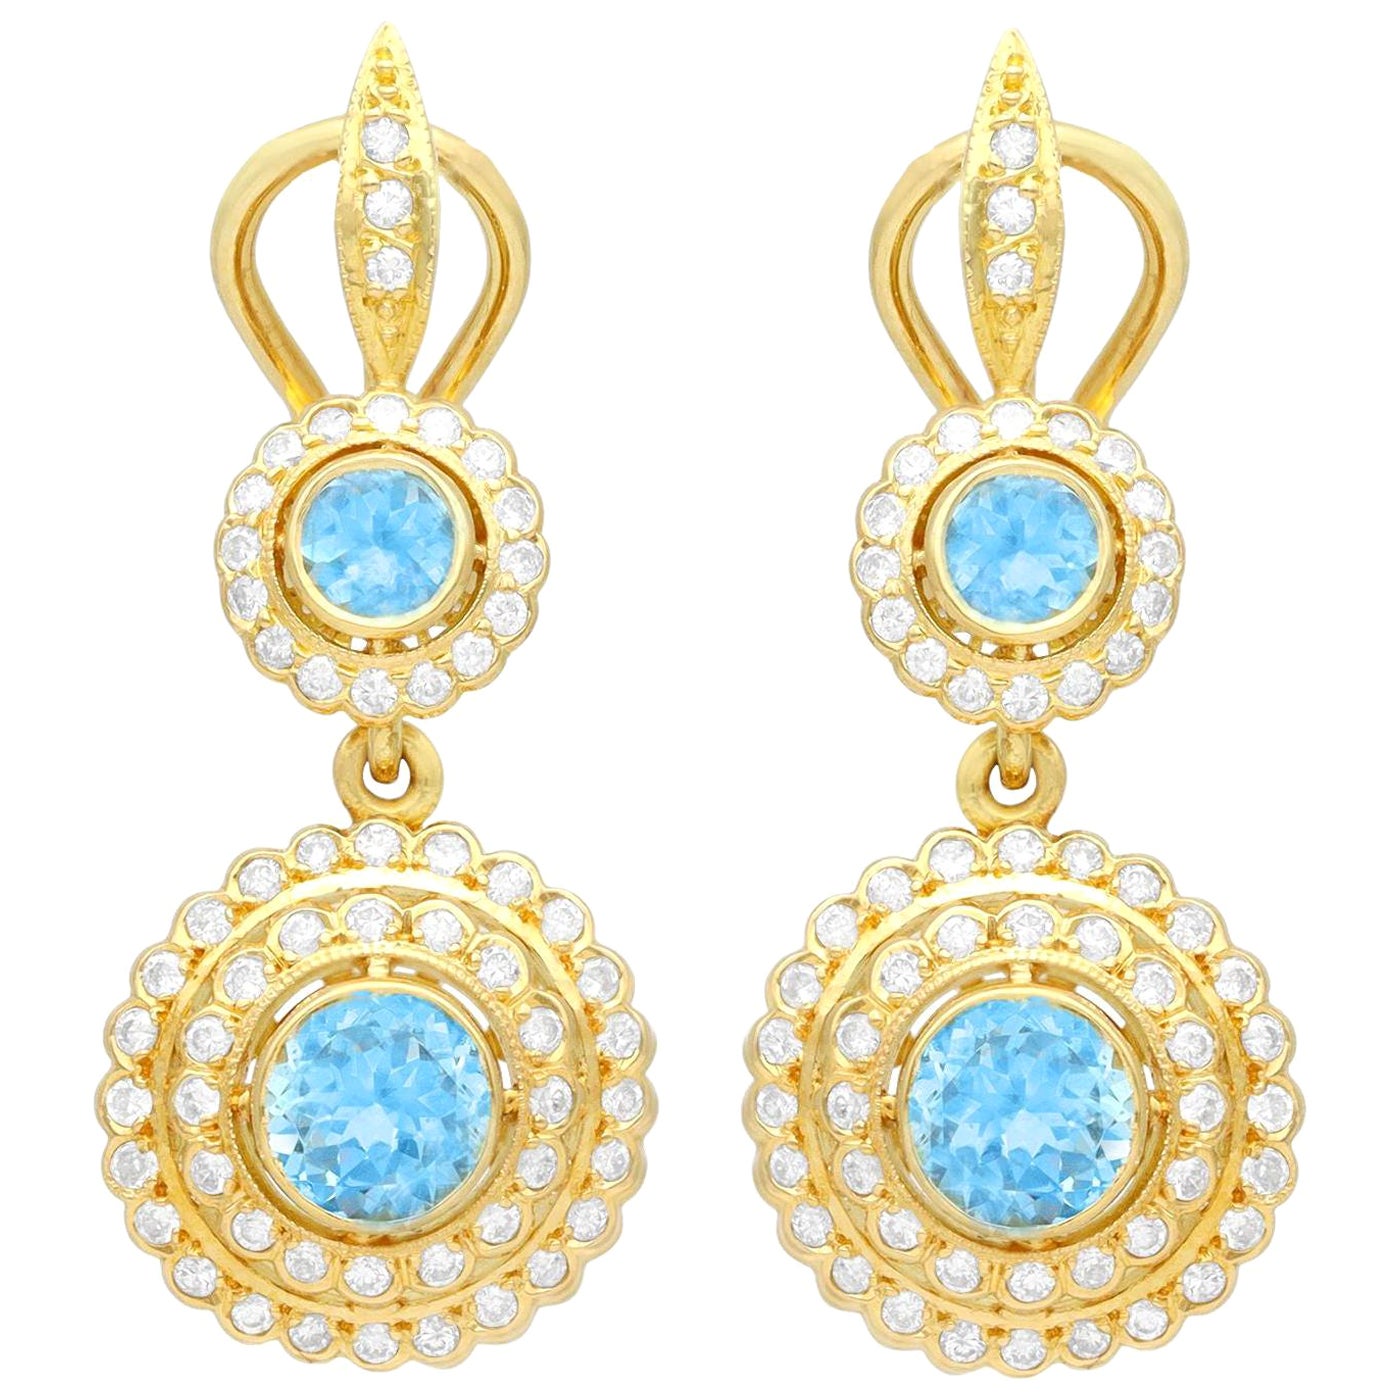 Vintage 1.80 Carat Aquamarine and 1.20 Carat Diamond and Yellow Gold Earrings For Sale